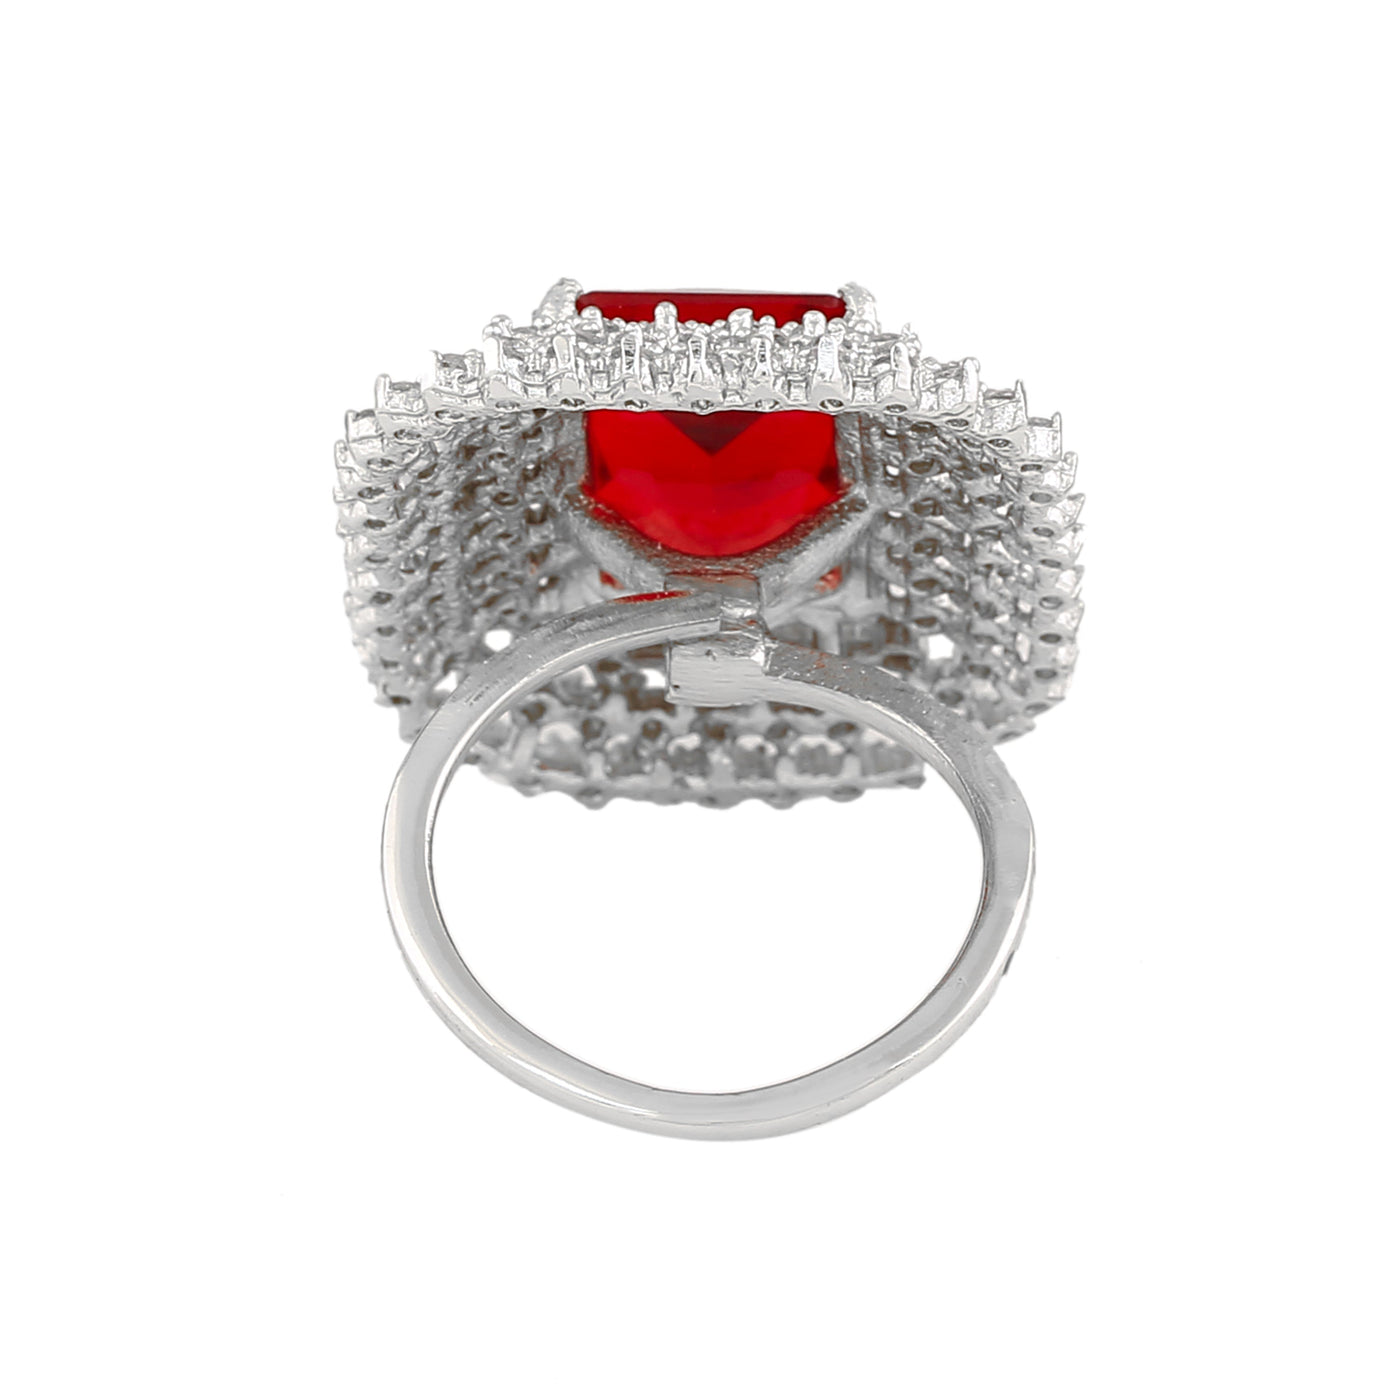 Estele Rhodium Plated Adjustable CZ Sparkling Finger Ring with Ruby Stone for Women